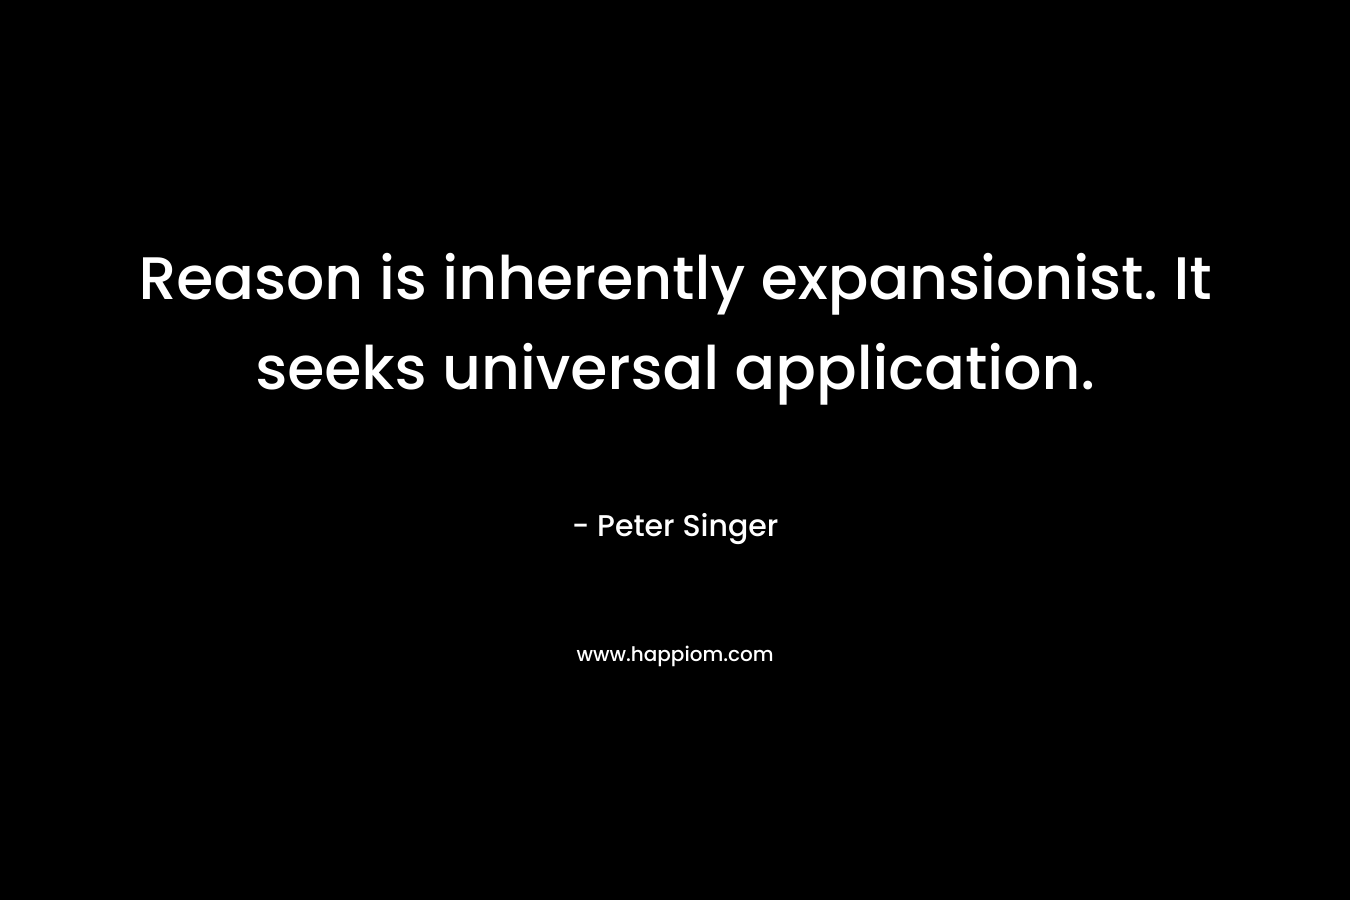 Reason is inherently expansionist. It seeks universal application. – Peter Singer